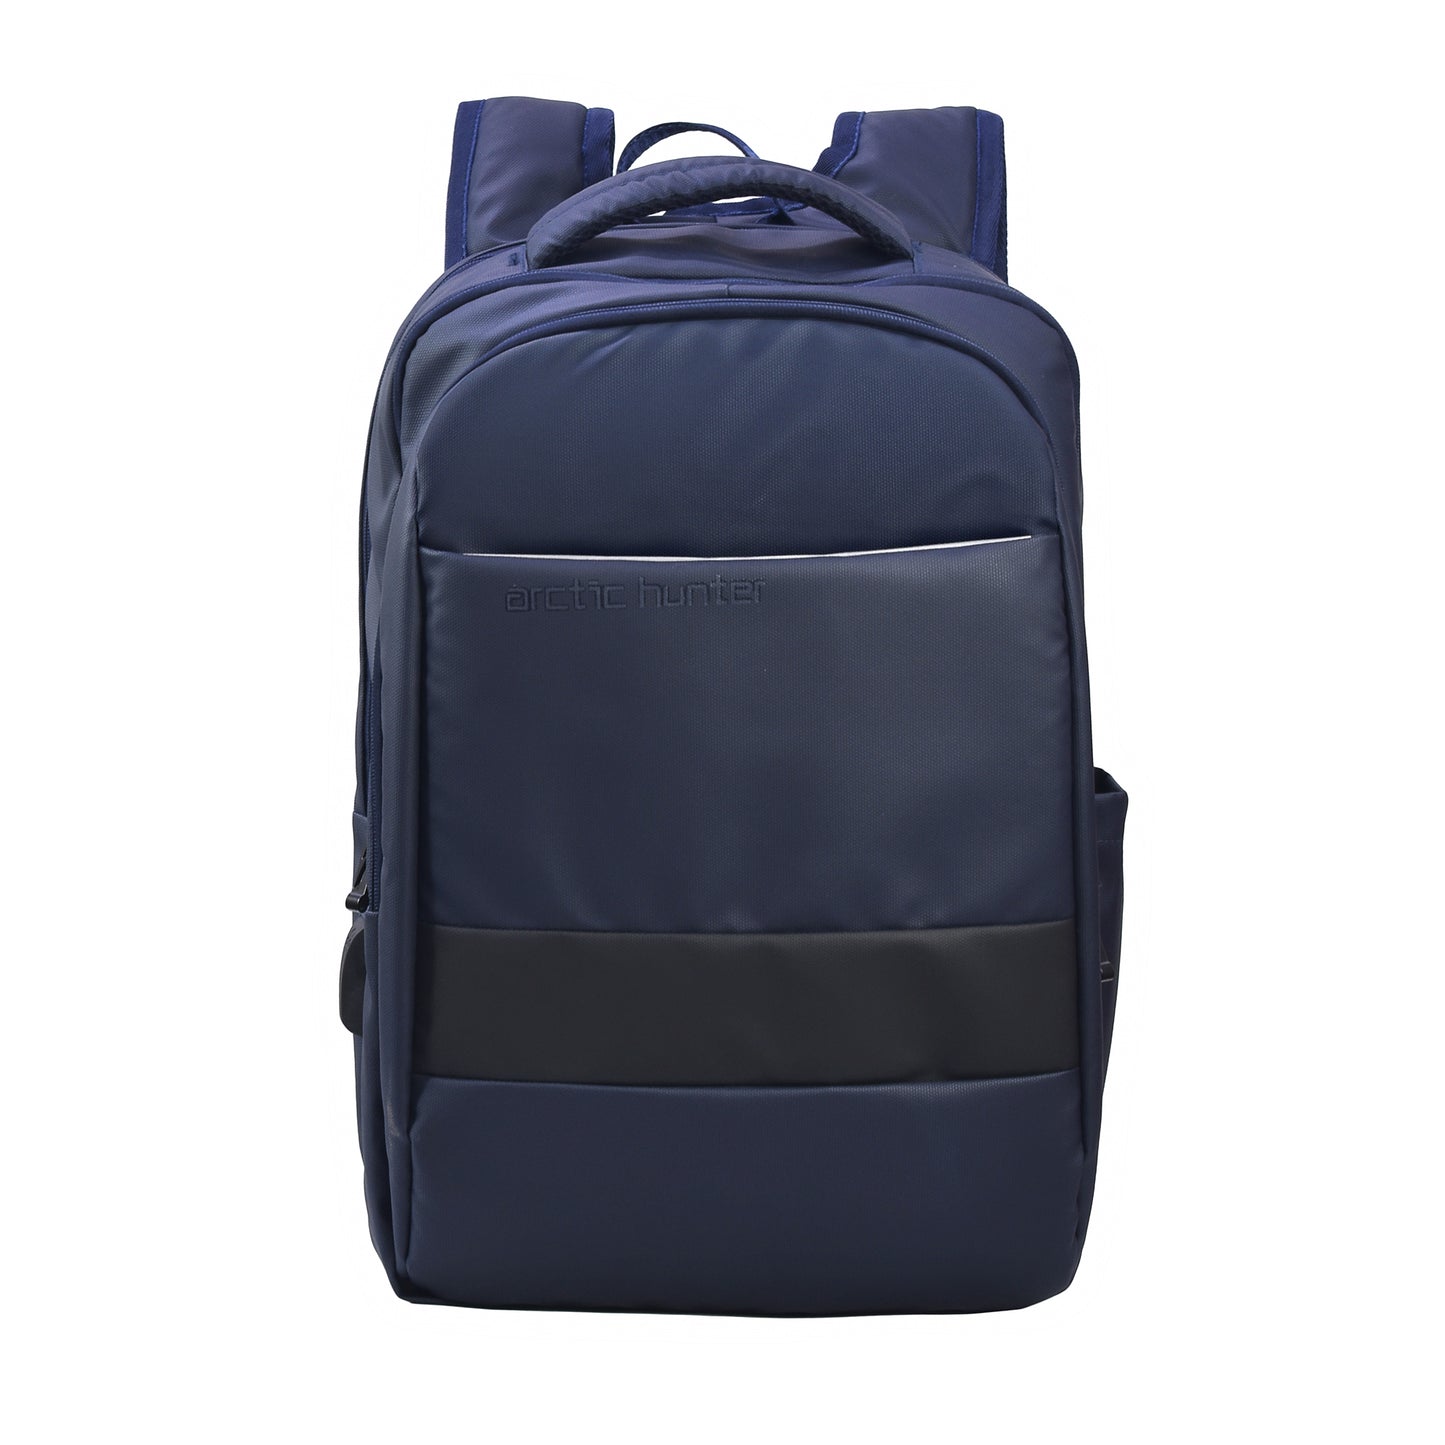 18 inch Laptop Backpack | Travel, Business and More | Arctic Bag 146